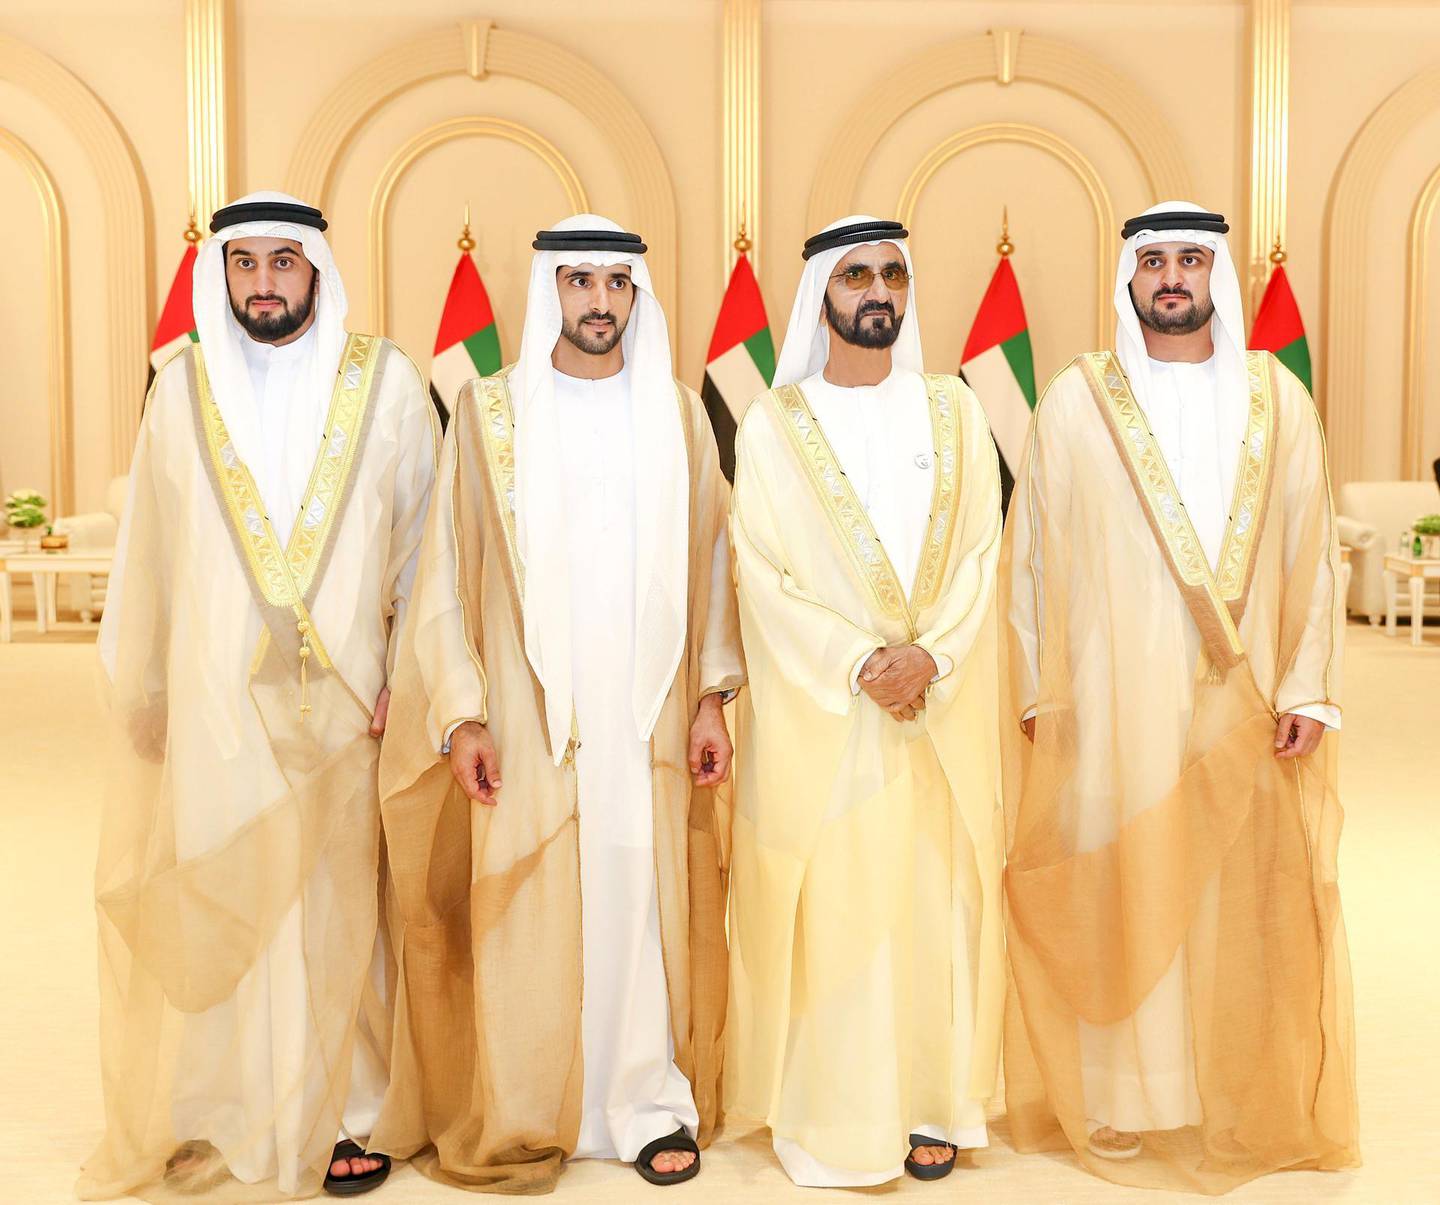 This handout picture provided by the UAE Ministry of Presidential Affairs on June 6, 2019 shows, Ruler of Dubai Sheikh Mohammed bin Rashid Al-Maktoum (2nd R), posing for a photograph with his sons, Crown Prince Sheikh Hamdan bin Mohammed (2nd L), Sheikh Maktoum bin Mohammed, (R), and Sheikh Ahmed bin Mohammed, on their wedding day in Dubai. (Photo by - / UAE Ministry of Presidential Affairs / AFP) / XGTY / RESTRICTED TO EDITORIAL USE - MANDATORY CREDIT "AFP PHOTO / UAE MINISTRY OF PRESIDENTIAL AFFAIRS - NO ADVERTISING CAMPAIGNS - DISTRIBUTED AS A SERVICE TO CLIENTS